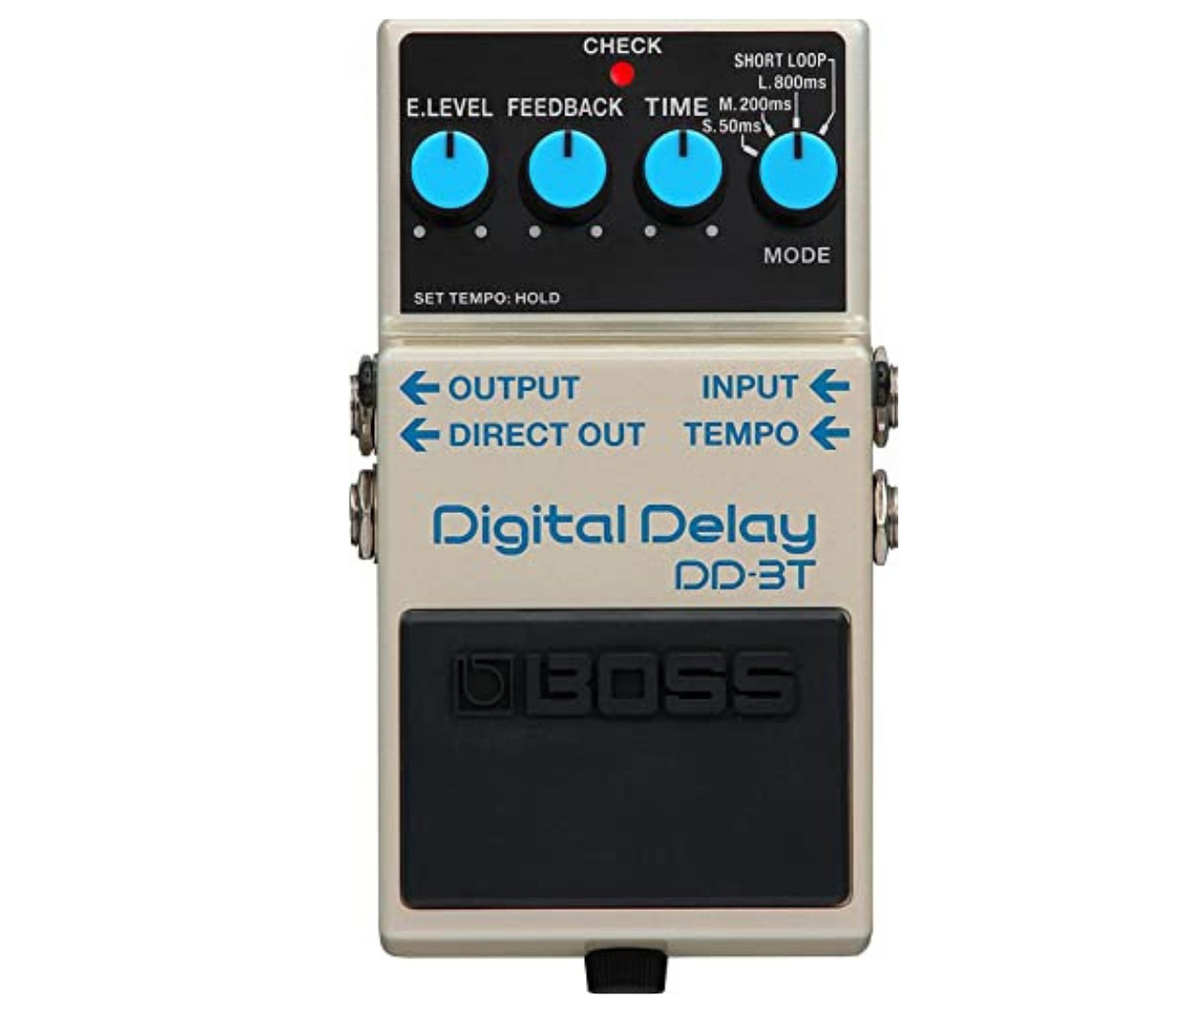 BOSS DD-3T Digital Delay Best Guitar Effects Pedal with Tap Tempo and Direct Out for Wet/Dry Setups